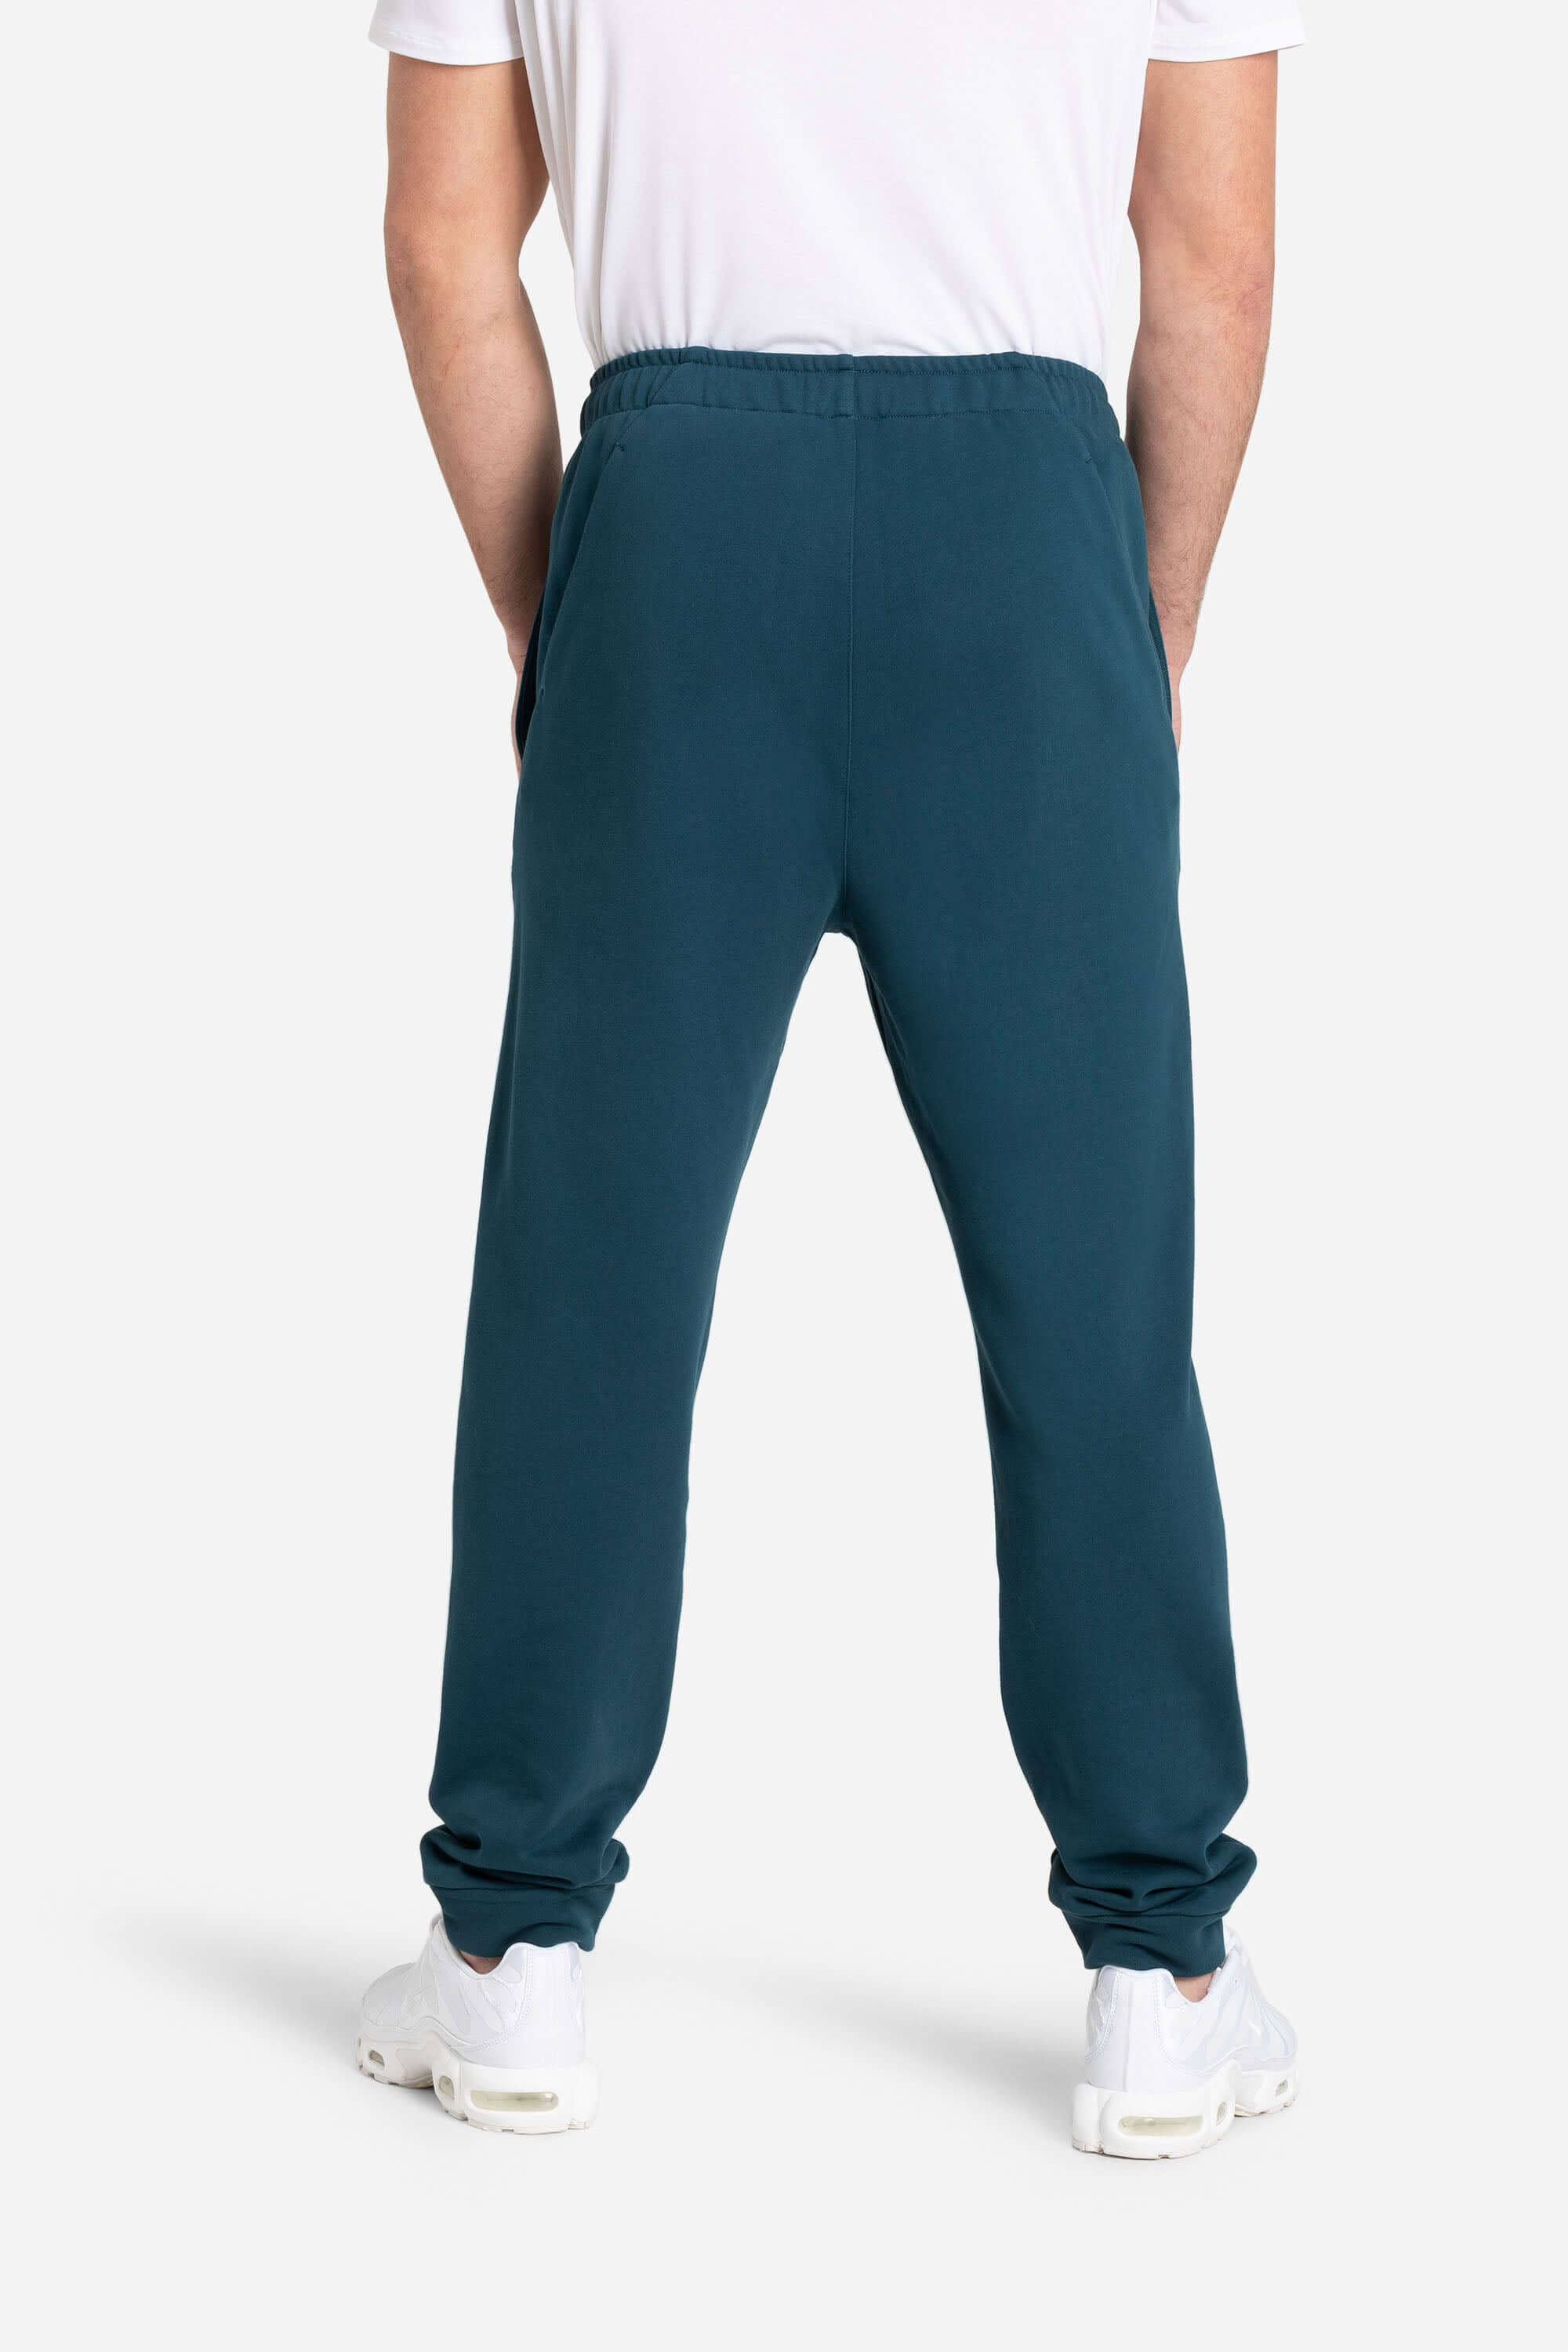 Men in blue joggers for training or leisure from AYCANE